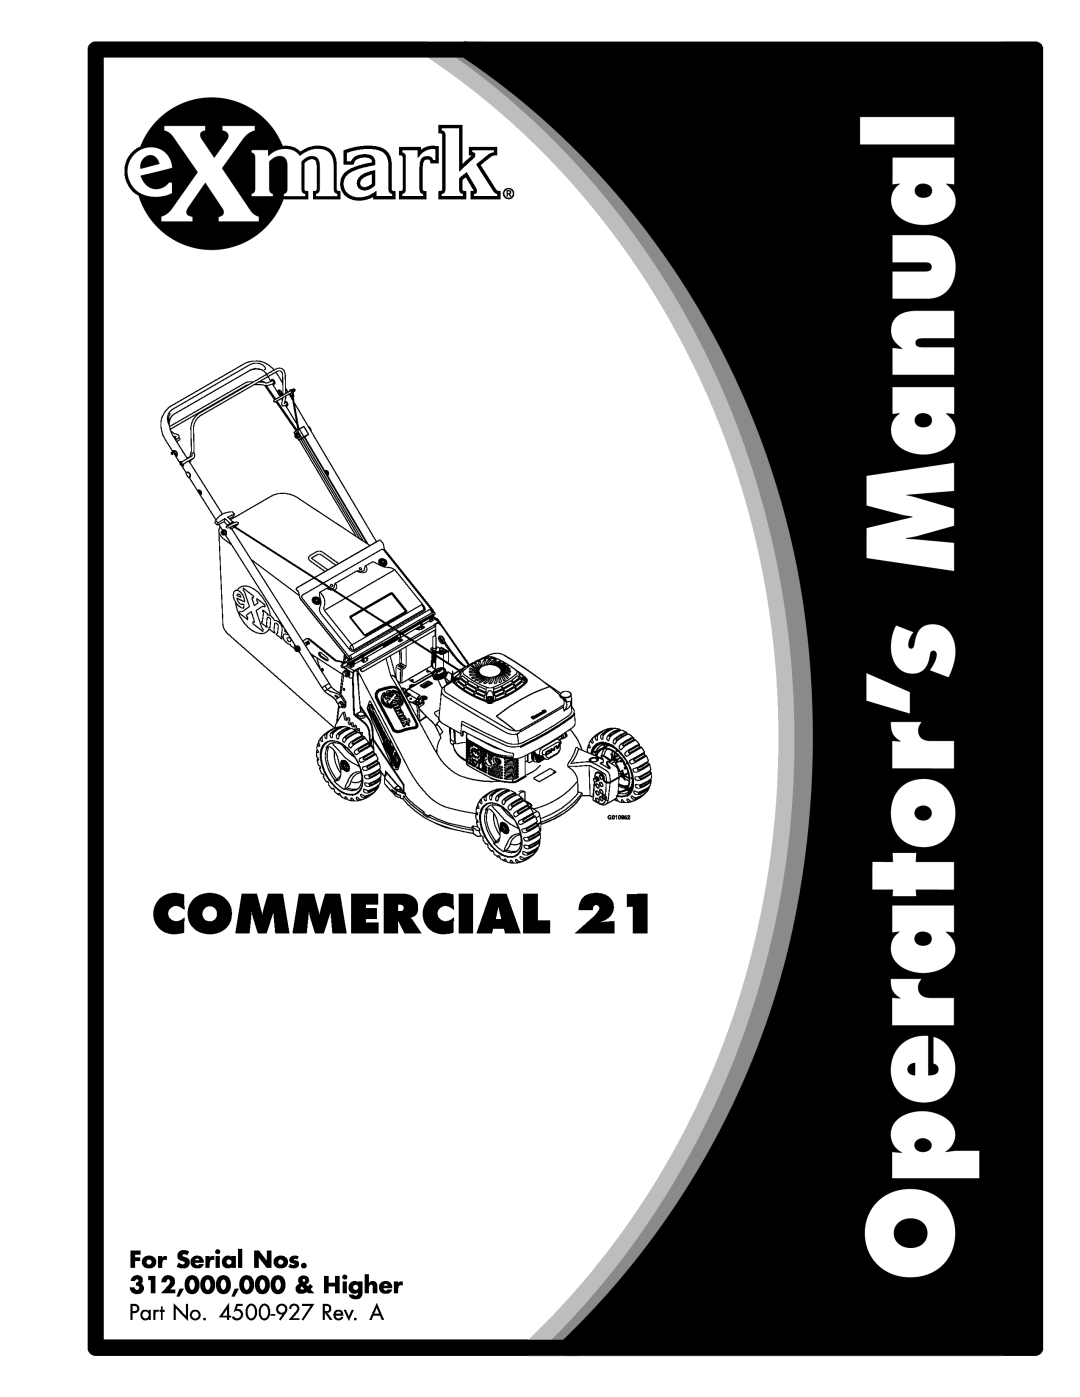 Exmark COMMERCIAL 21 manual Commercial, For Serial Nos 312,000,000 & Higher 